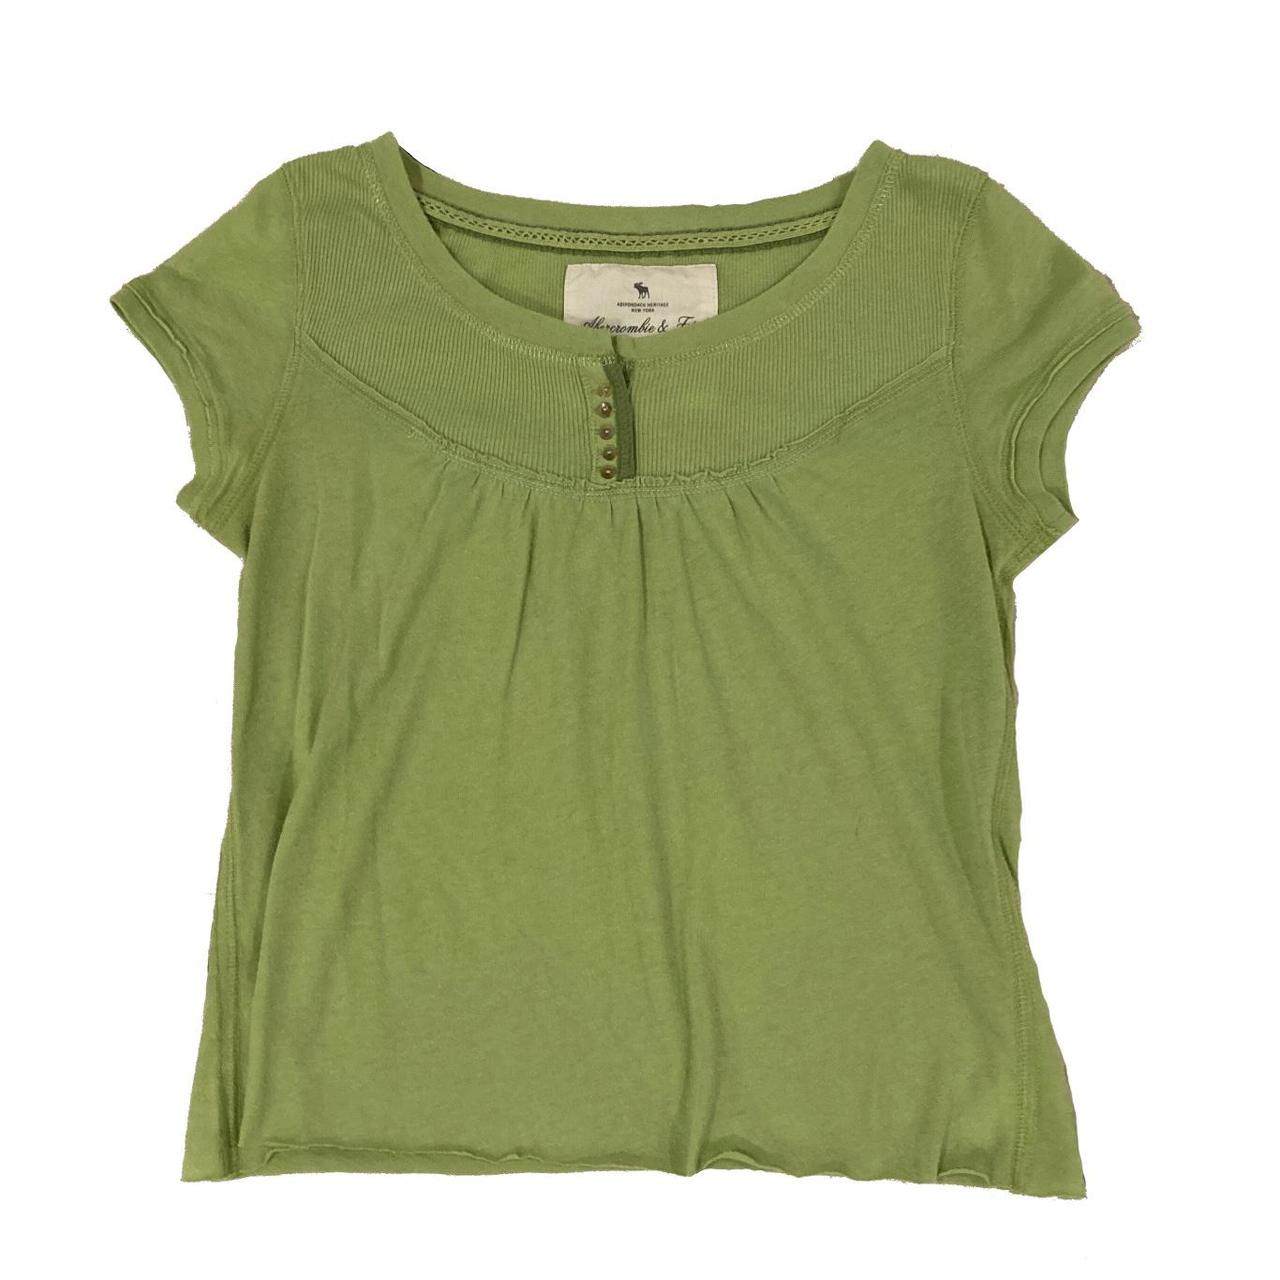 Abercrombie & Fitch Women's Green